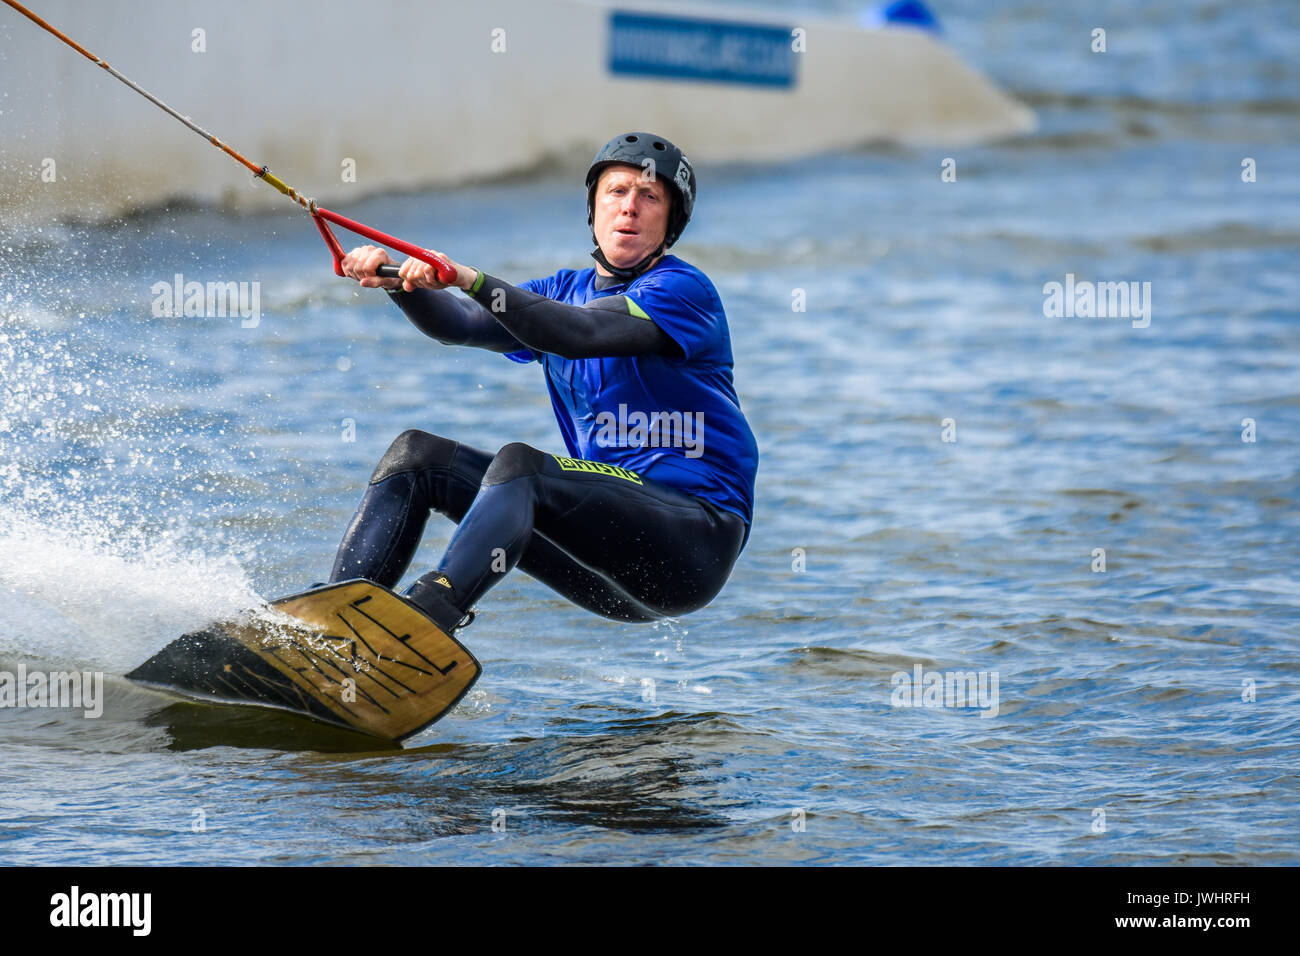 Wakeboarding via a cable tow system at Chasewater, Staffordshire, UK Stock Photo